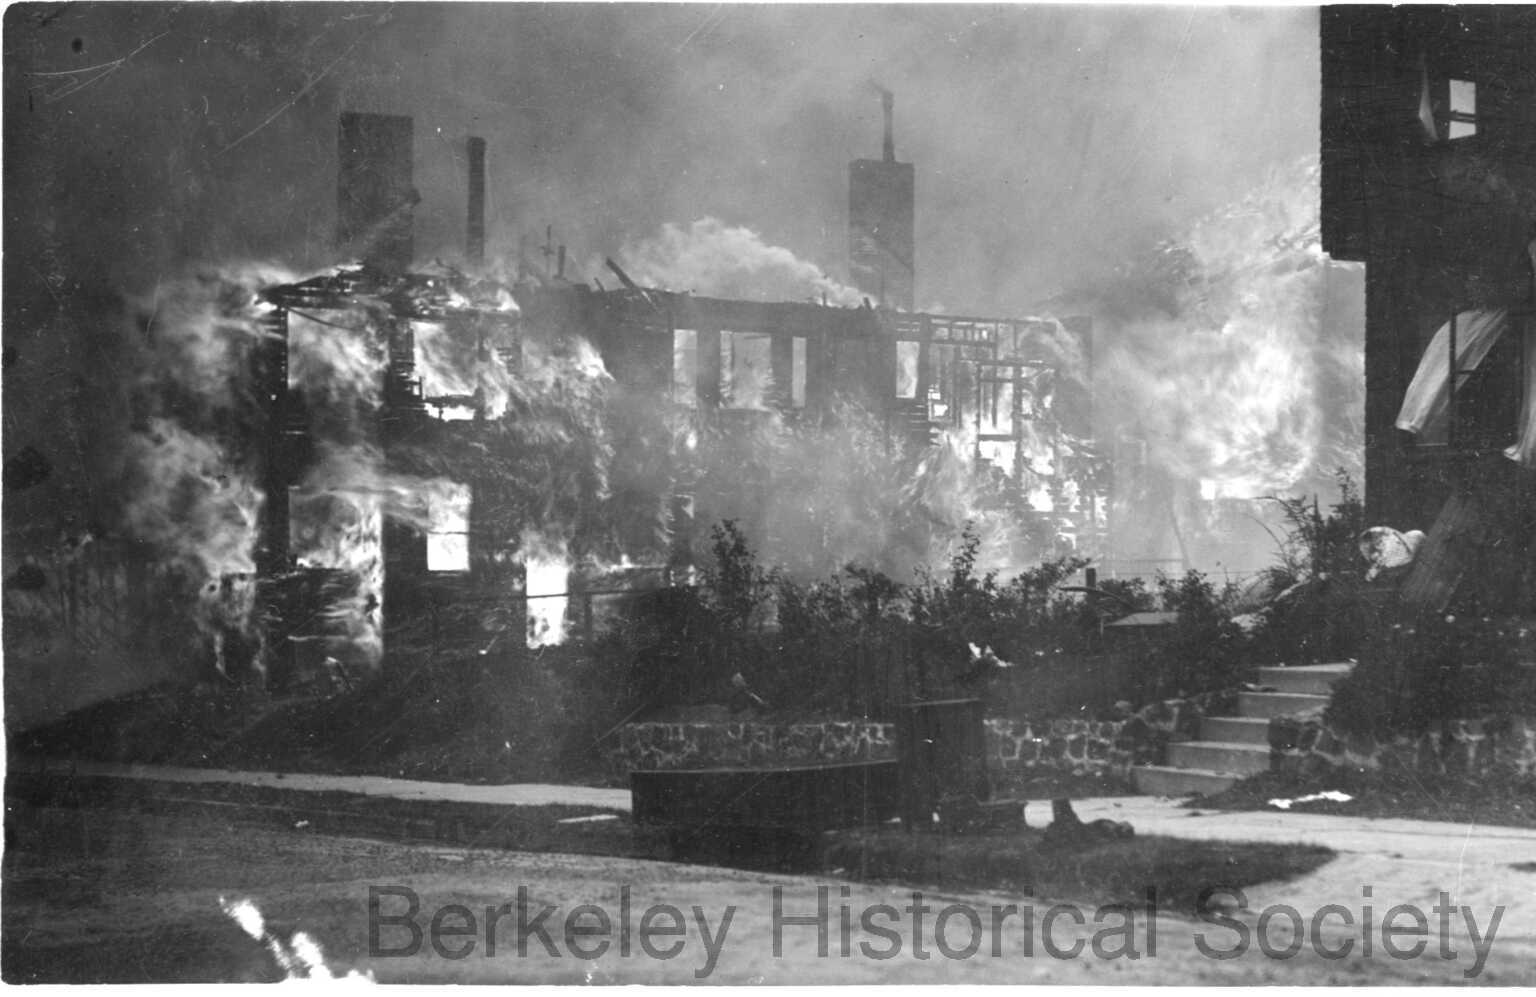 100 years after Berkeley’s 1923 fire, another tragedy could be even likelier